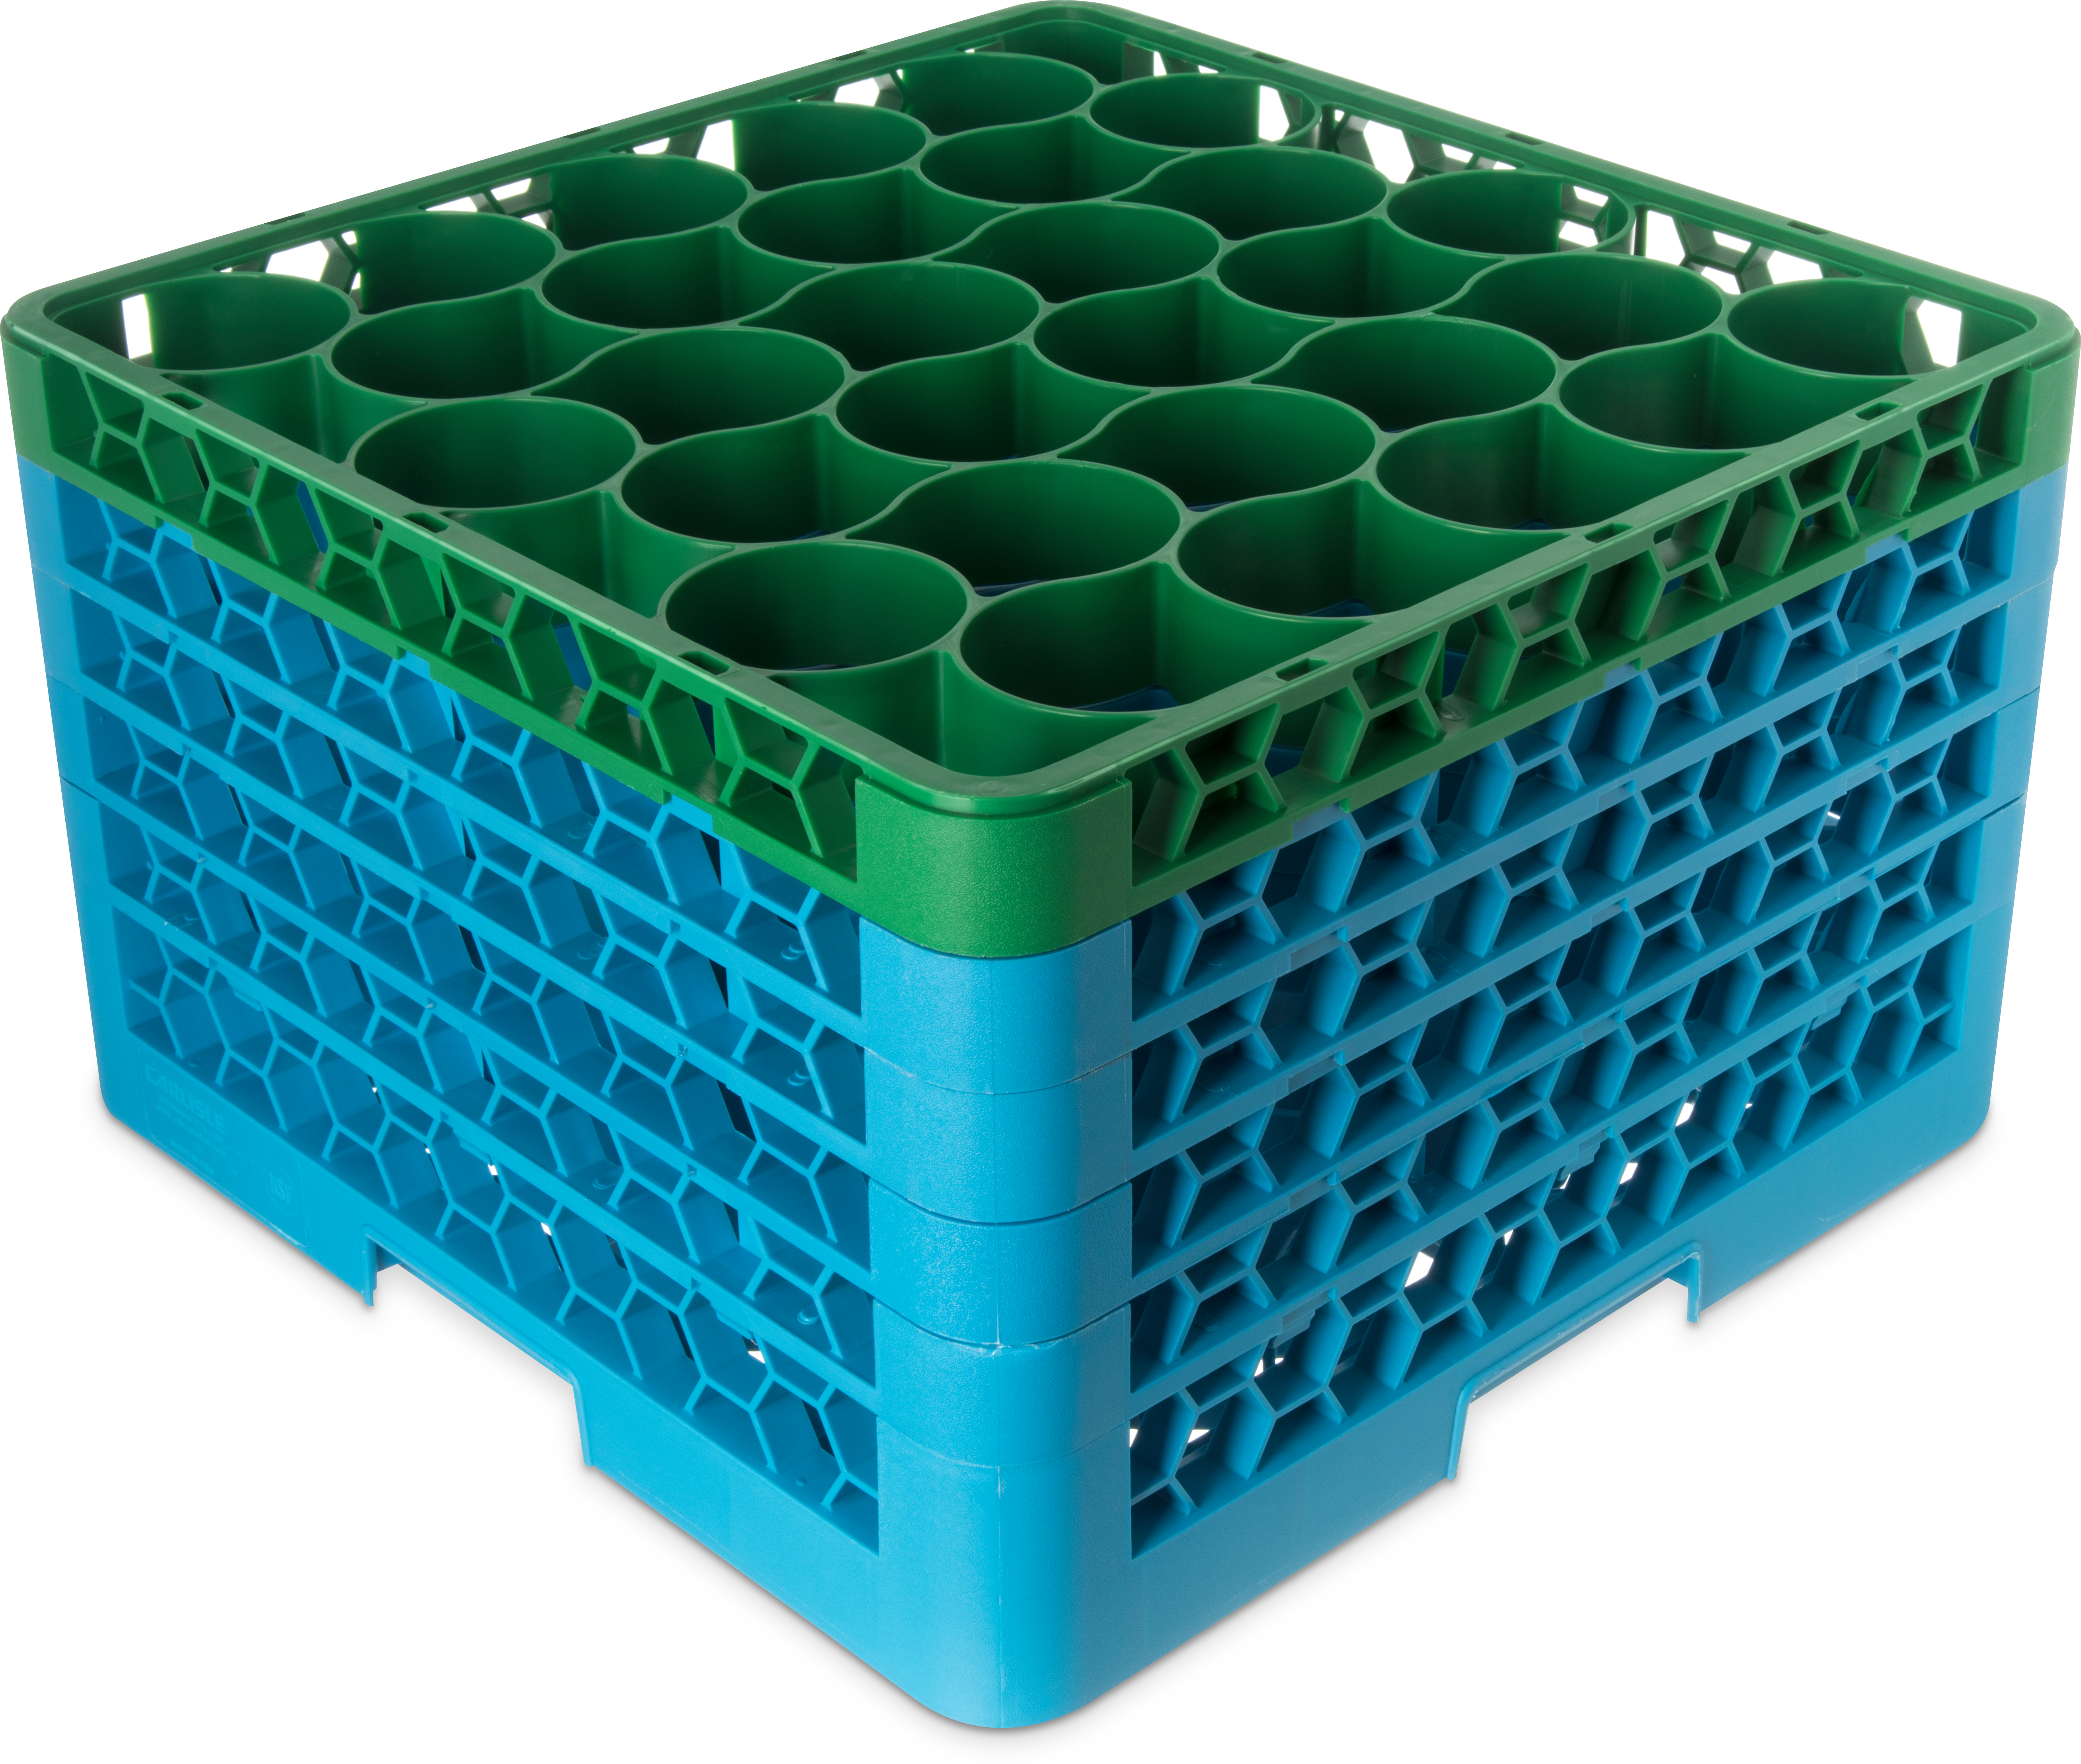 OptiClean NeWave Color-Coded Glass Rack with Four Extenders 30 Compartment - Green-Carlisle Blue